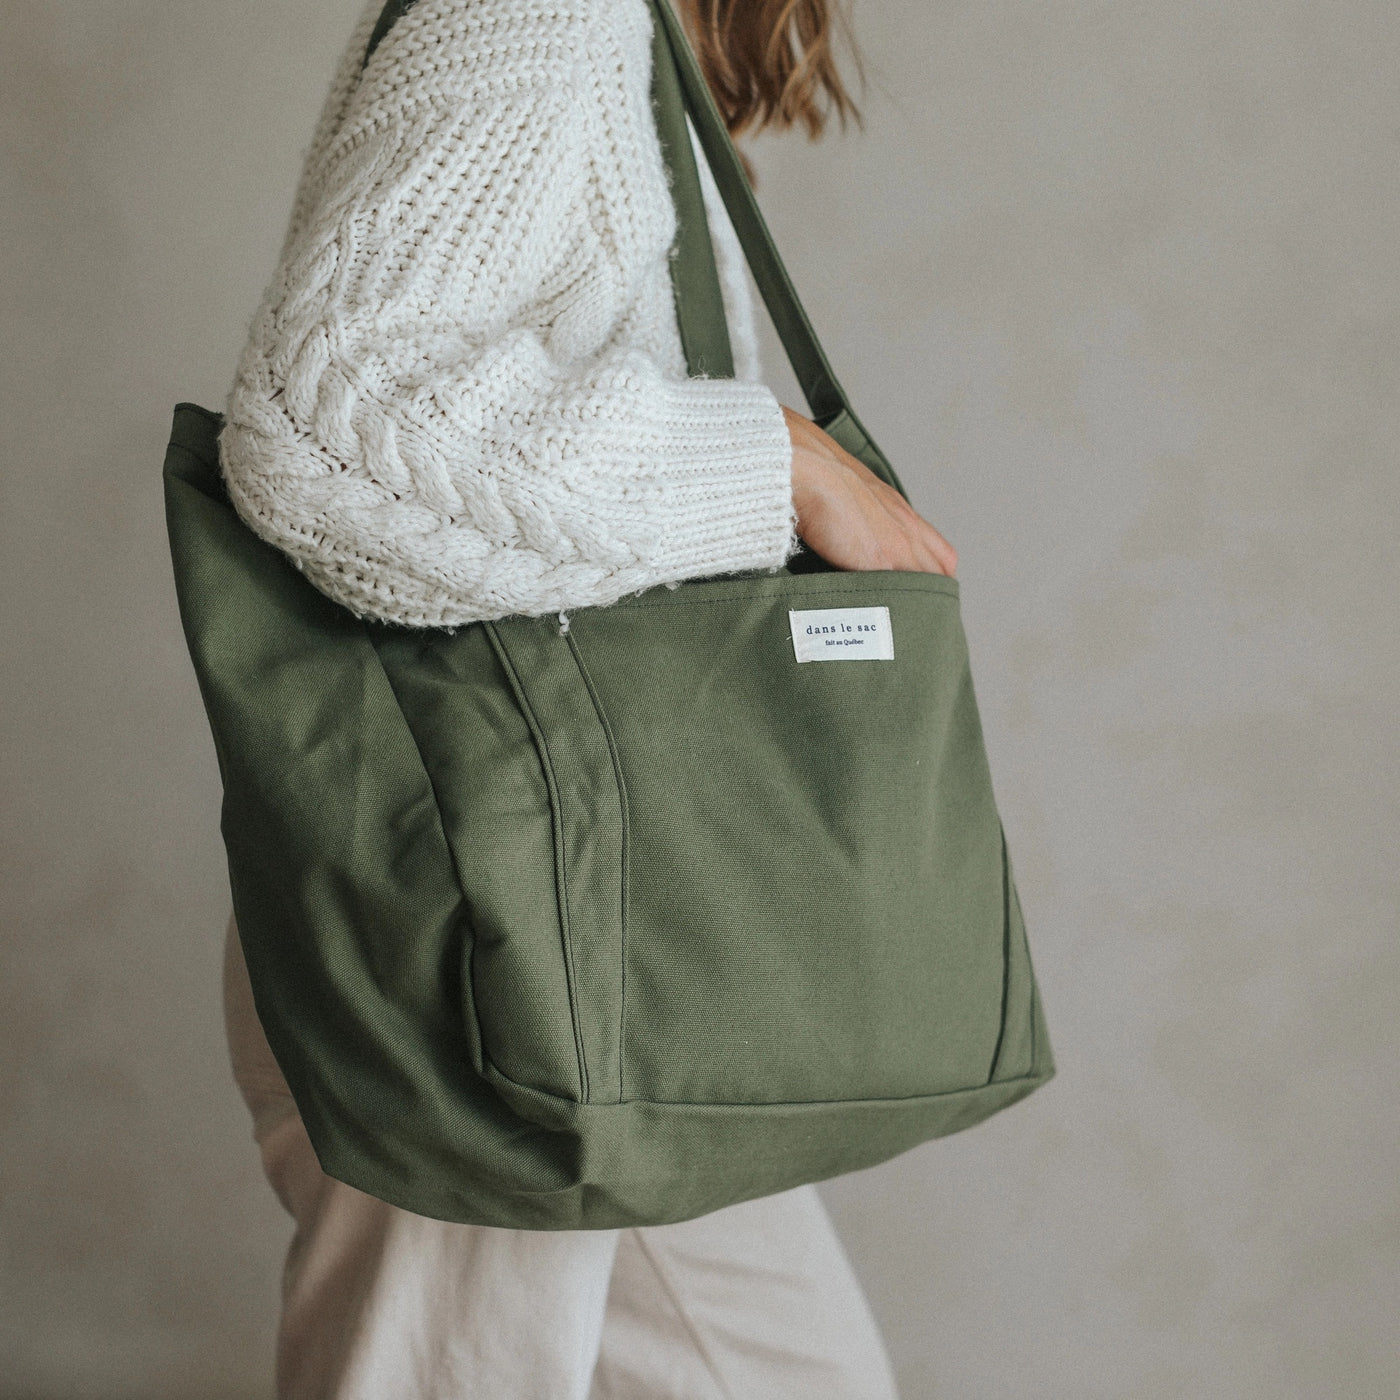 Large Fall Tote Bag - Olive